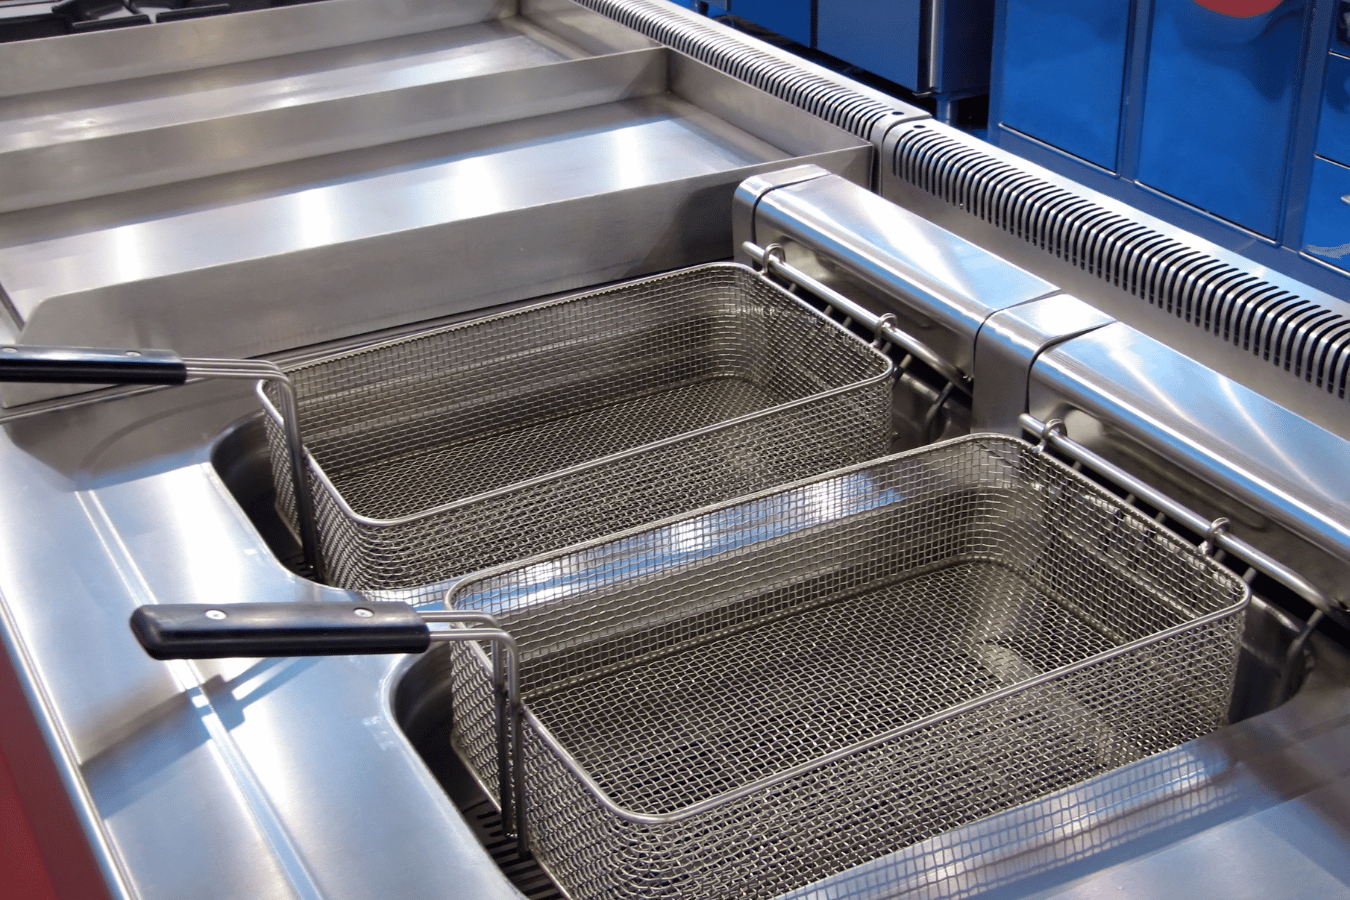 Two frying baskets are sitting on top of a stainless steel counter.